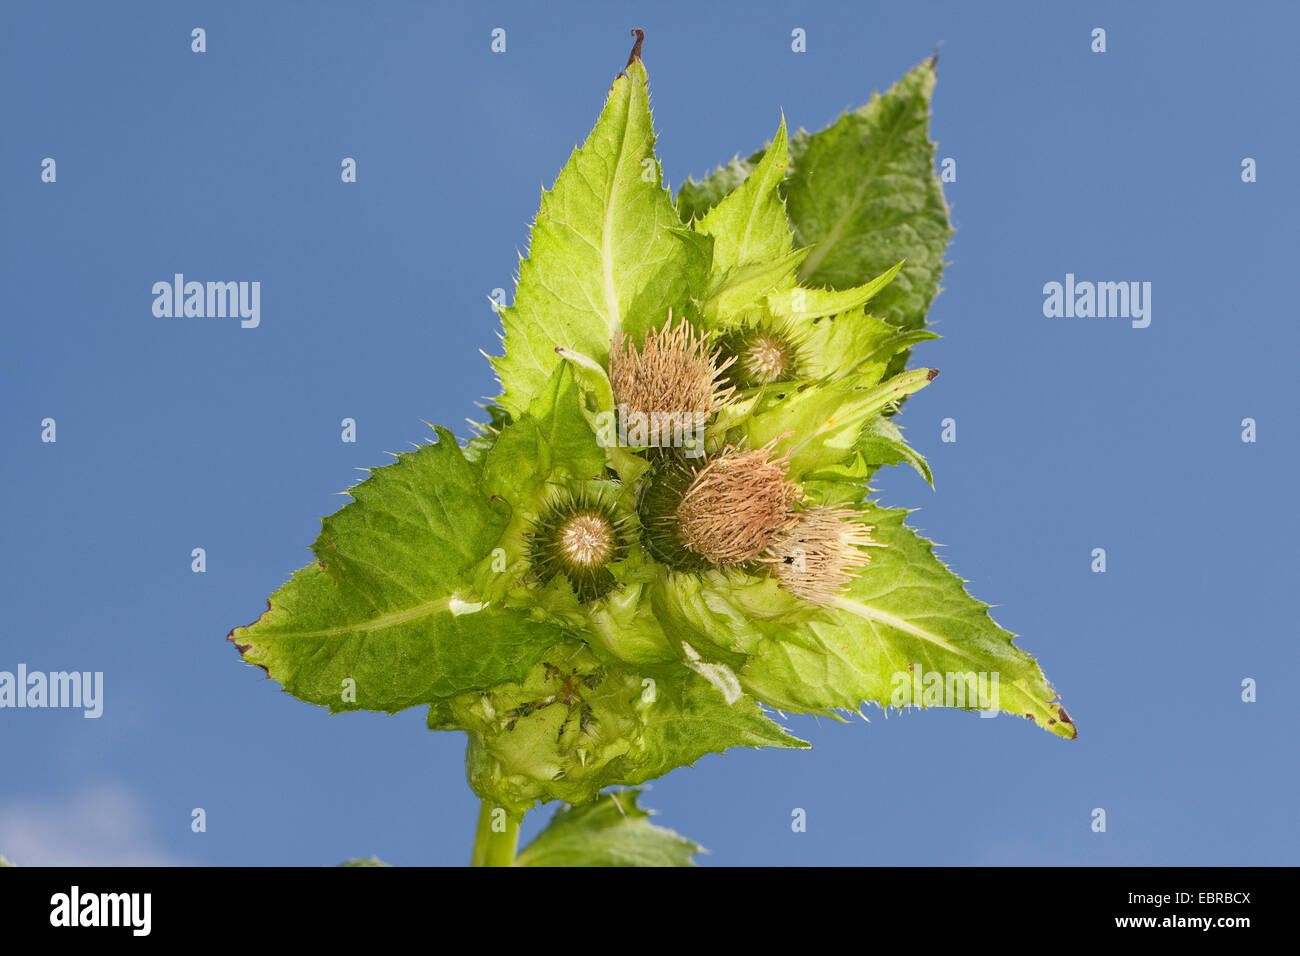 cabbage thistle (Cirsium oleraceum), blooming, Germany Stock Photo